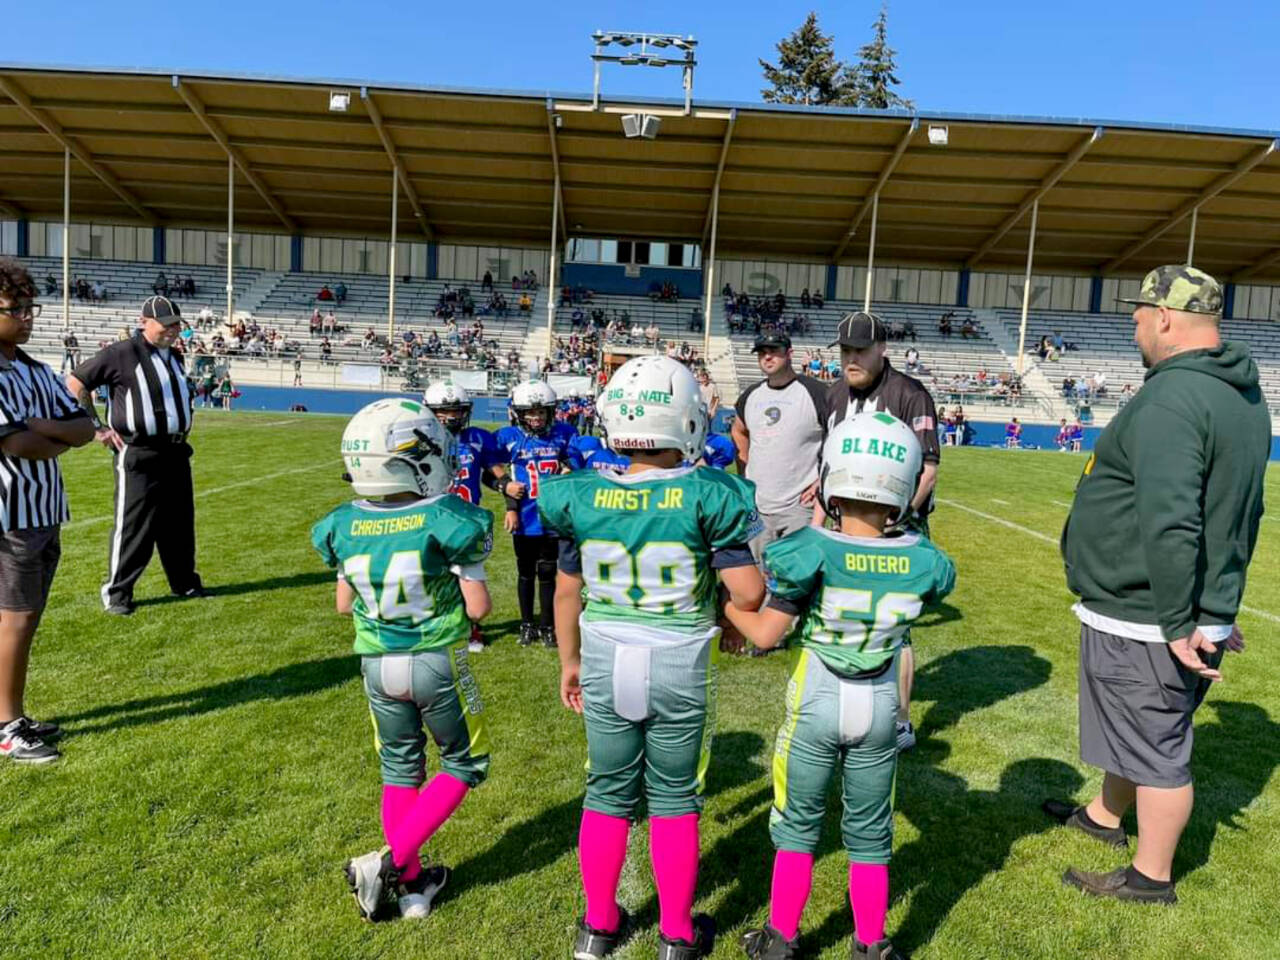 From left, Trust Christianson, Nate Hirst Jr. and Blake Botero wait on the sidelines during the Future Riders Green C team’s 44-14 win Saturday at Civic Field. (Courtesy photo)